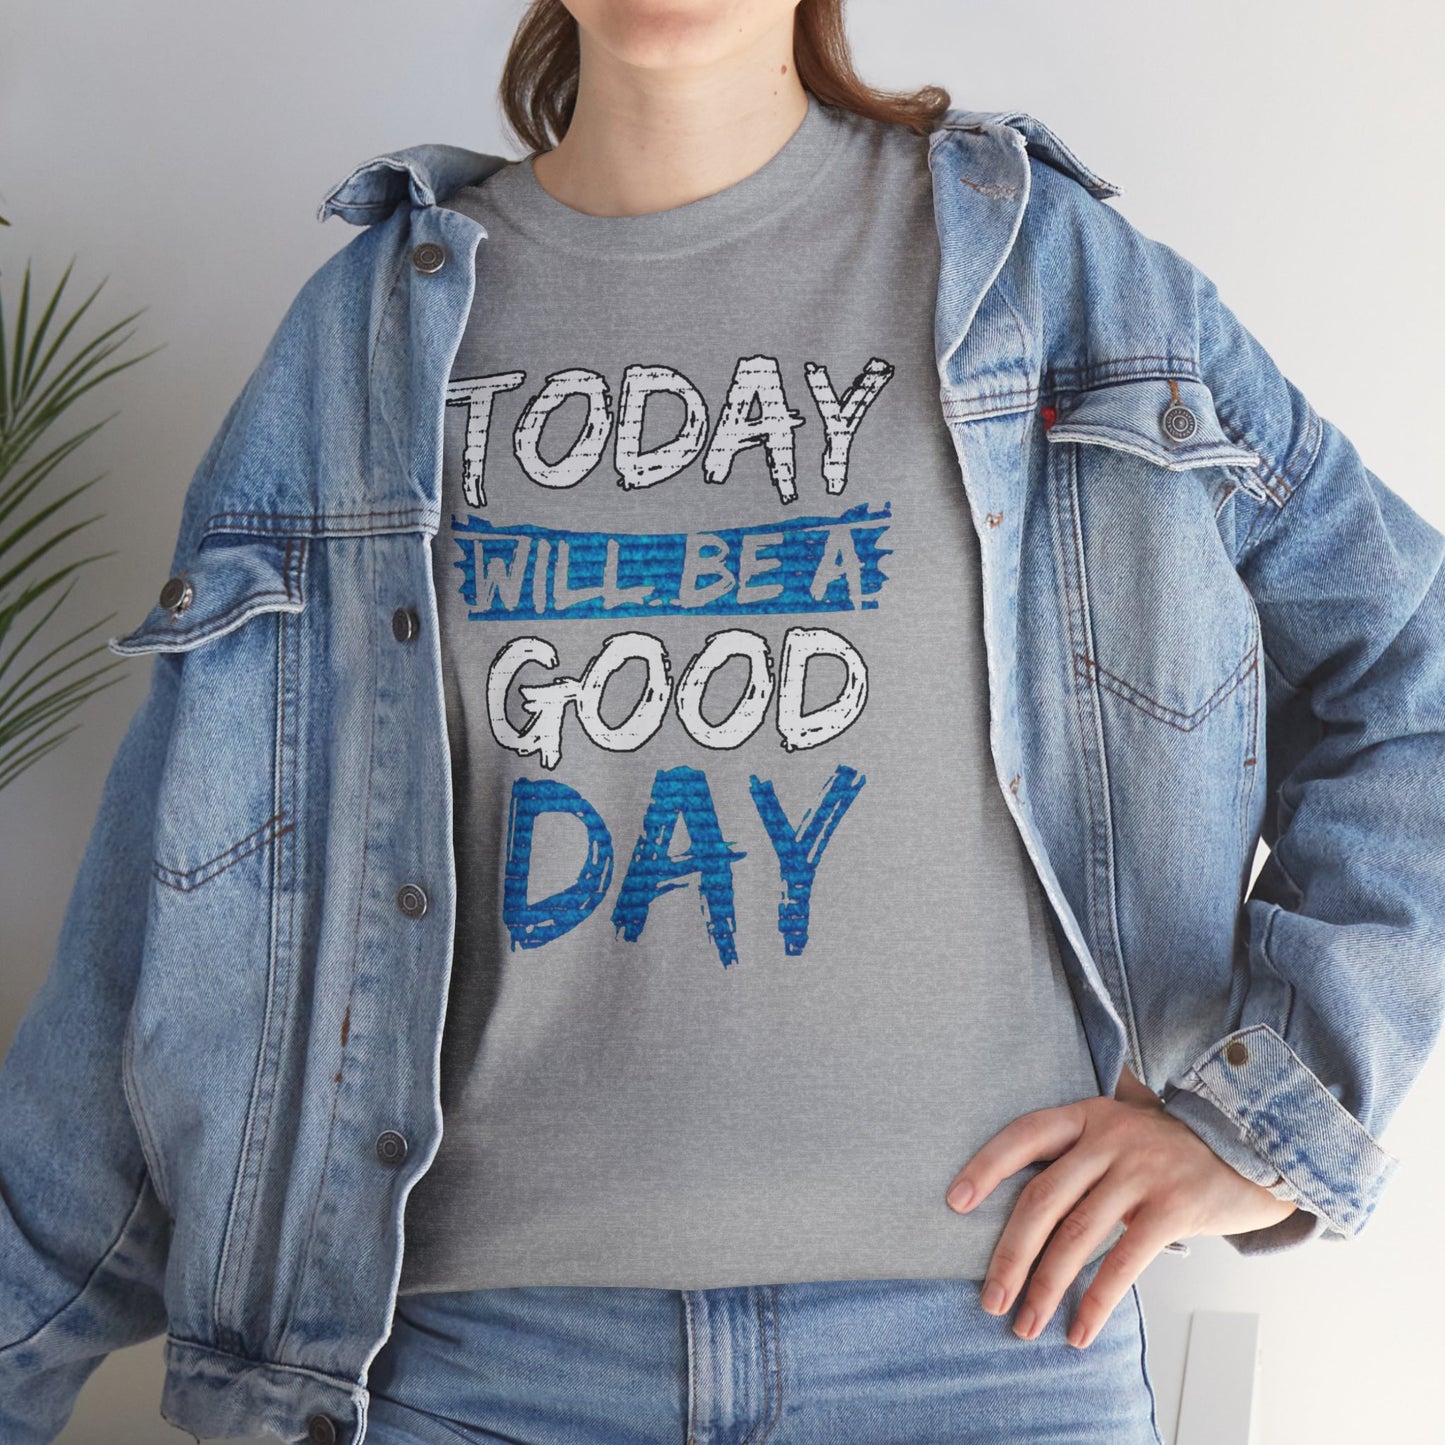 Today Will Be A Good Day High Quality Printed Unisex Heavy Cotton T-shirt